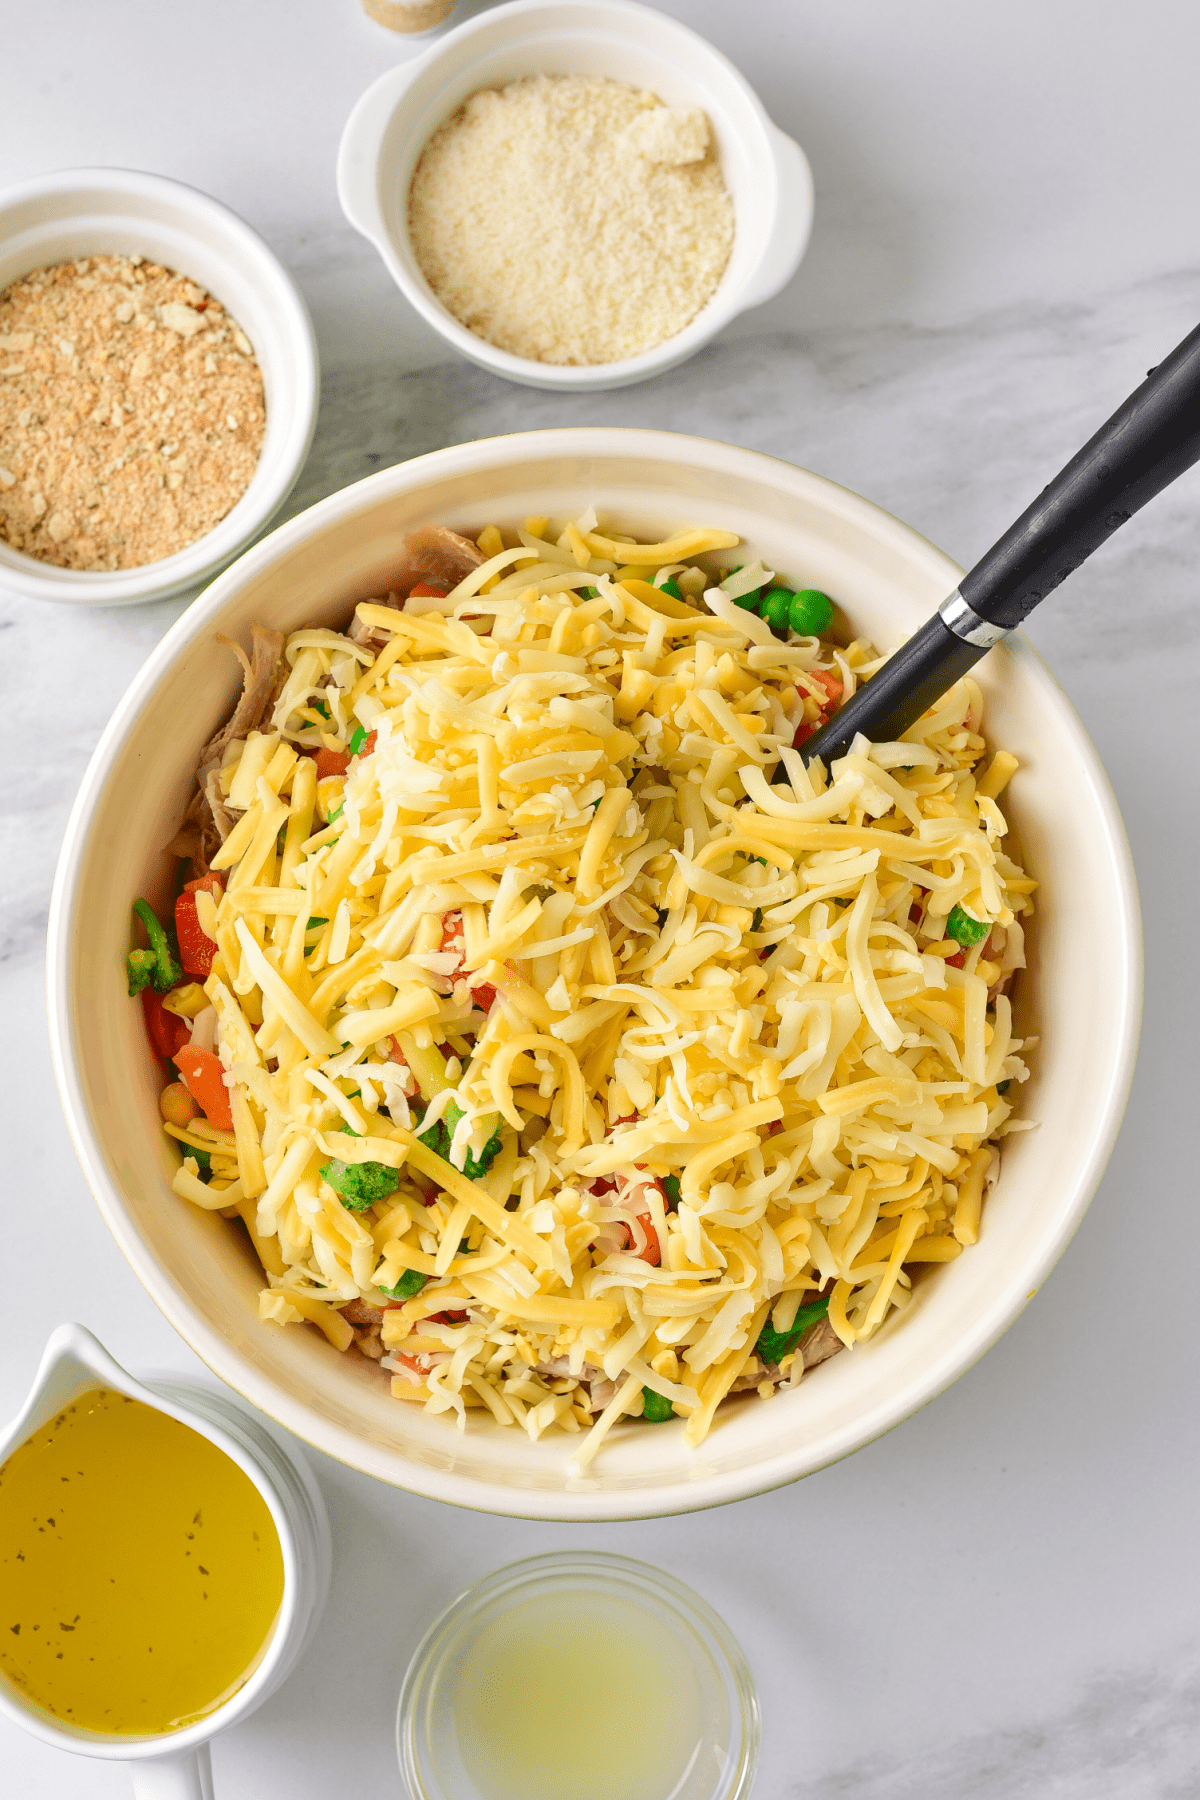 Cheese, turkey and vegetables in a mixing bowl